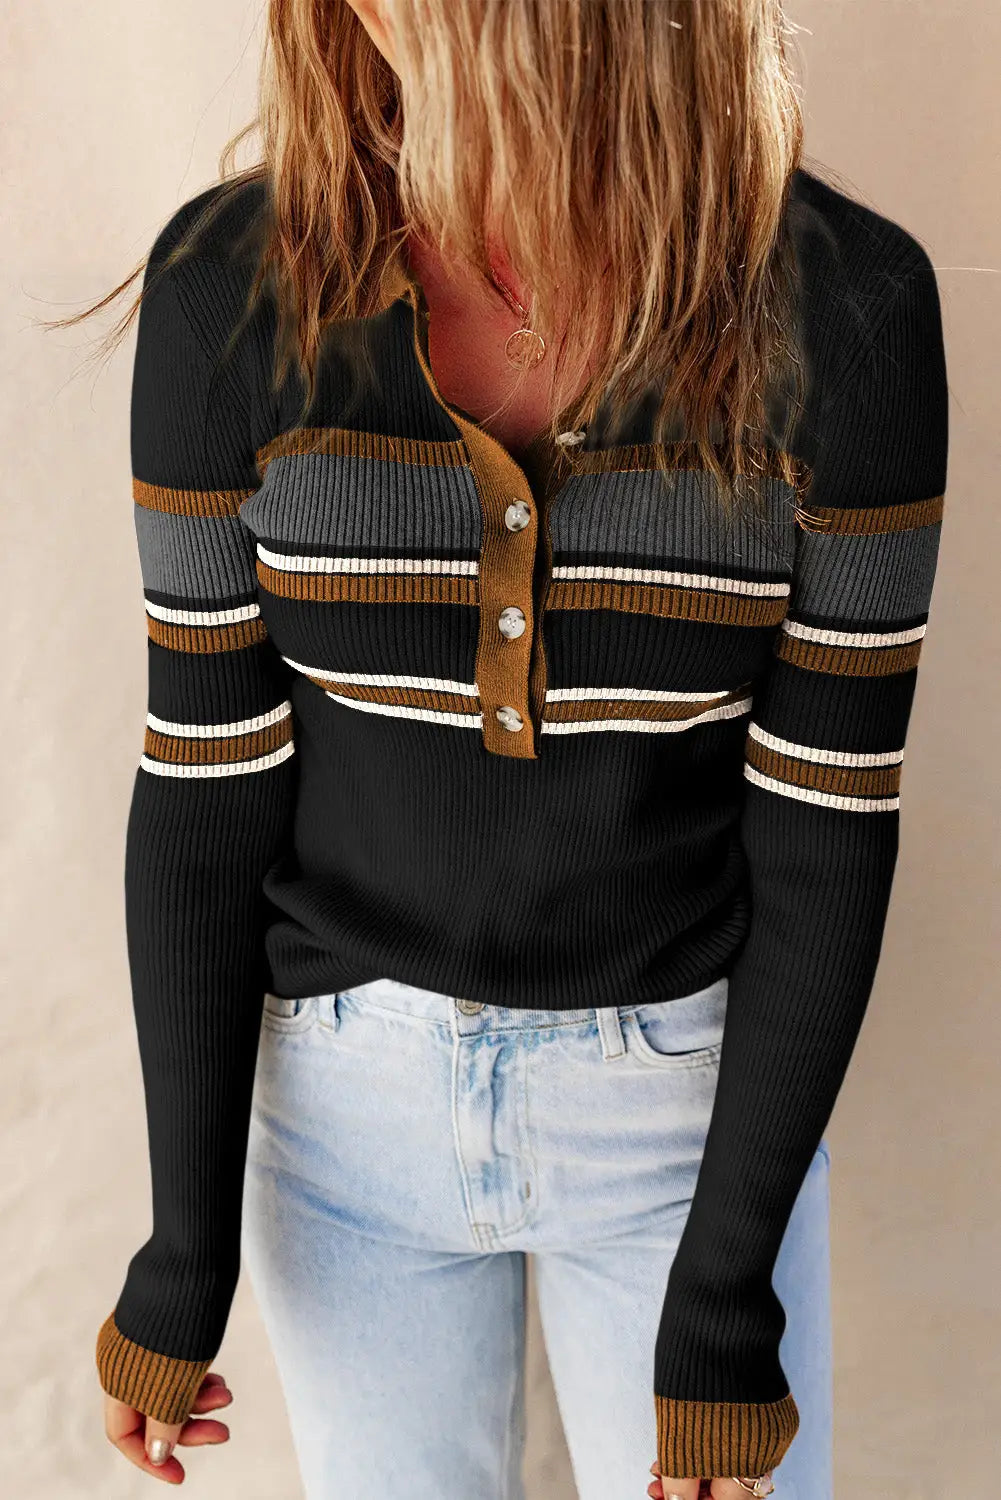 Black rib knitted stripe detail henley sweater - s / 80% cotton + 20% polyester - sweaters & cardigans